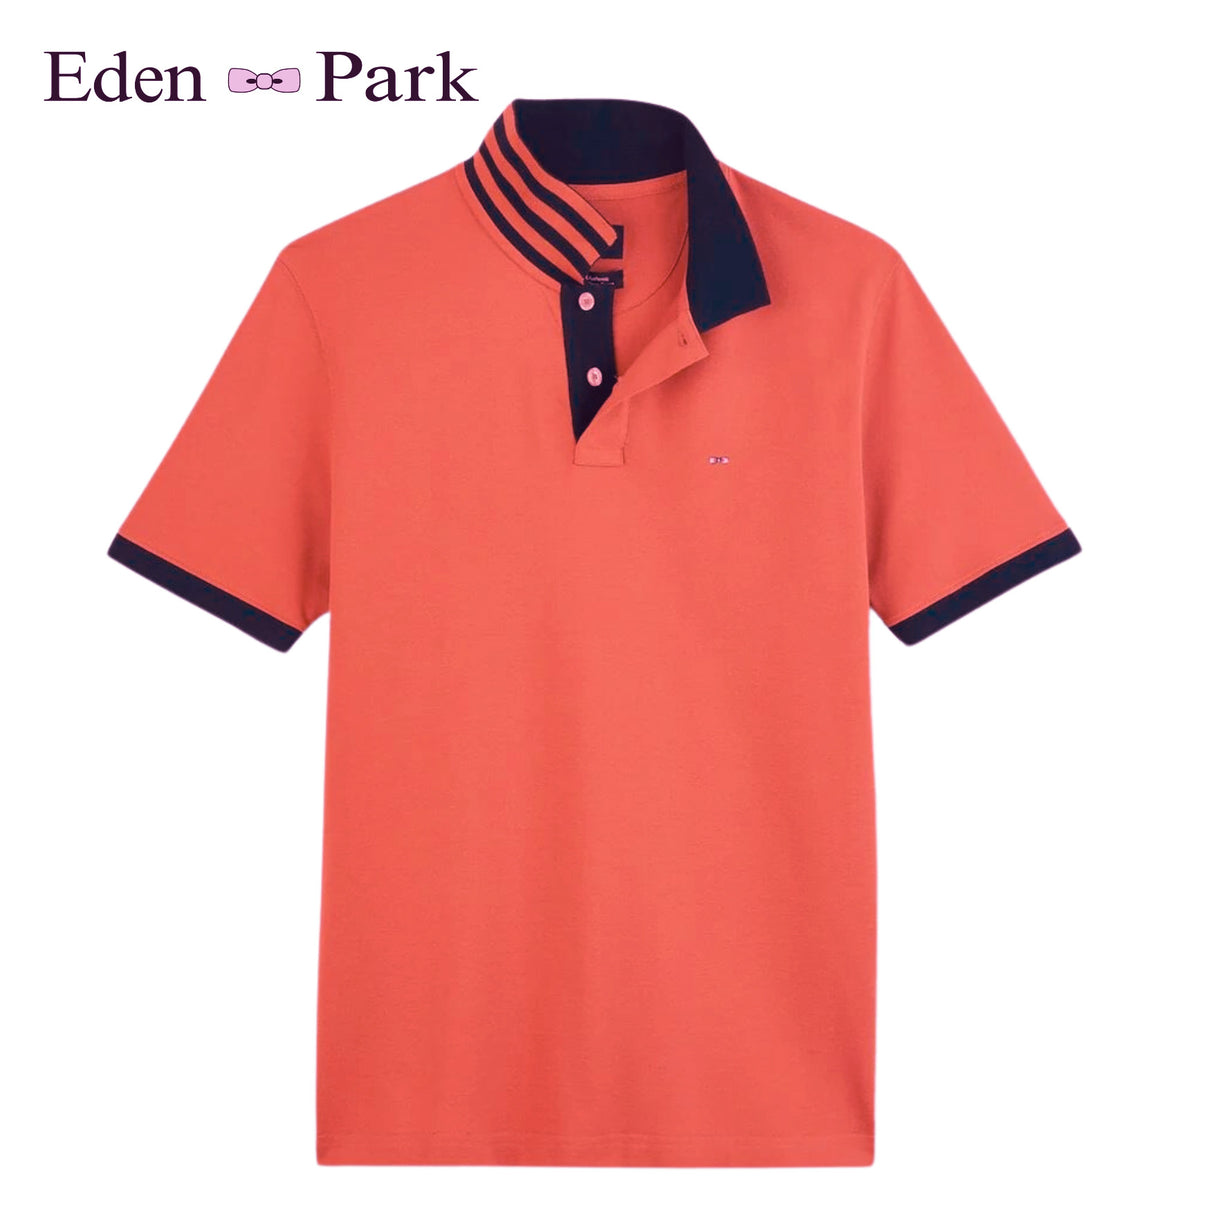 Eden Park Capitanie Lobster Tipped Polo Pink